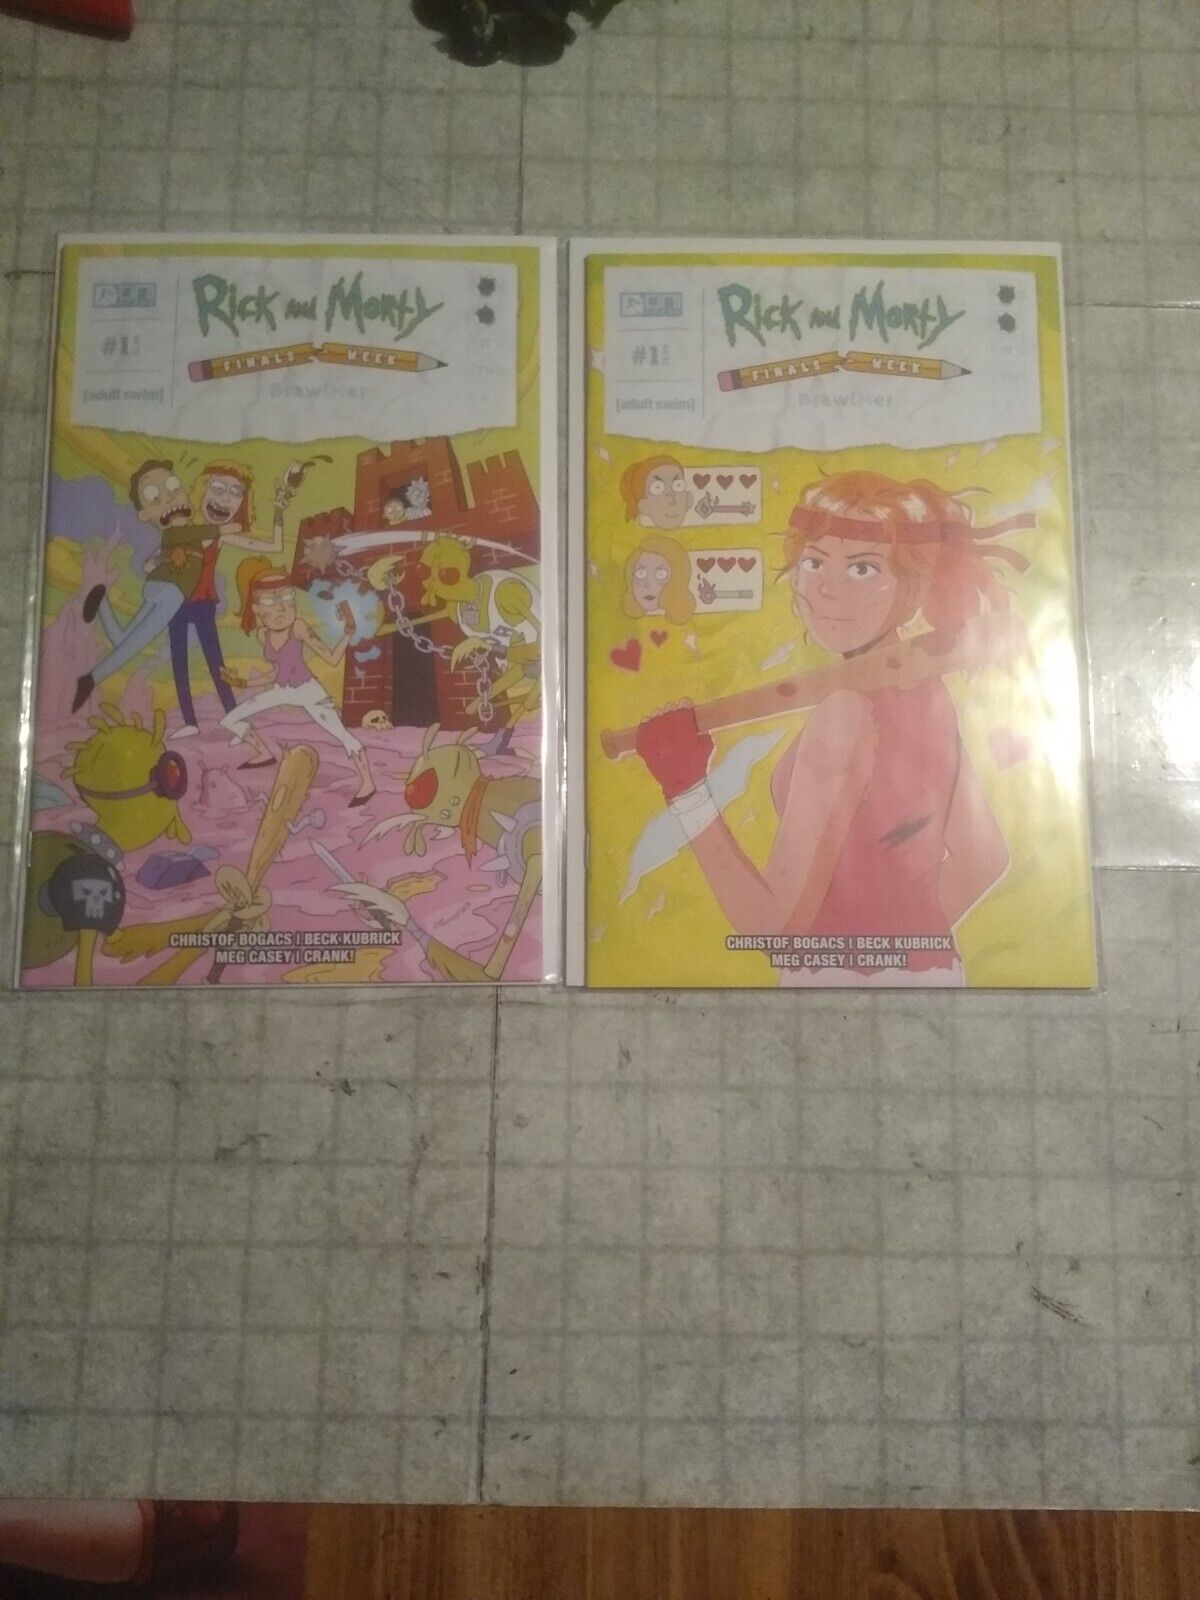 Rick And Morty Finals Week #1 Cover A And Cover B Variants By James Lloyd And...